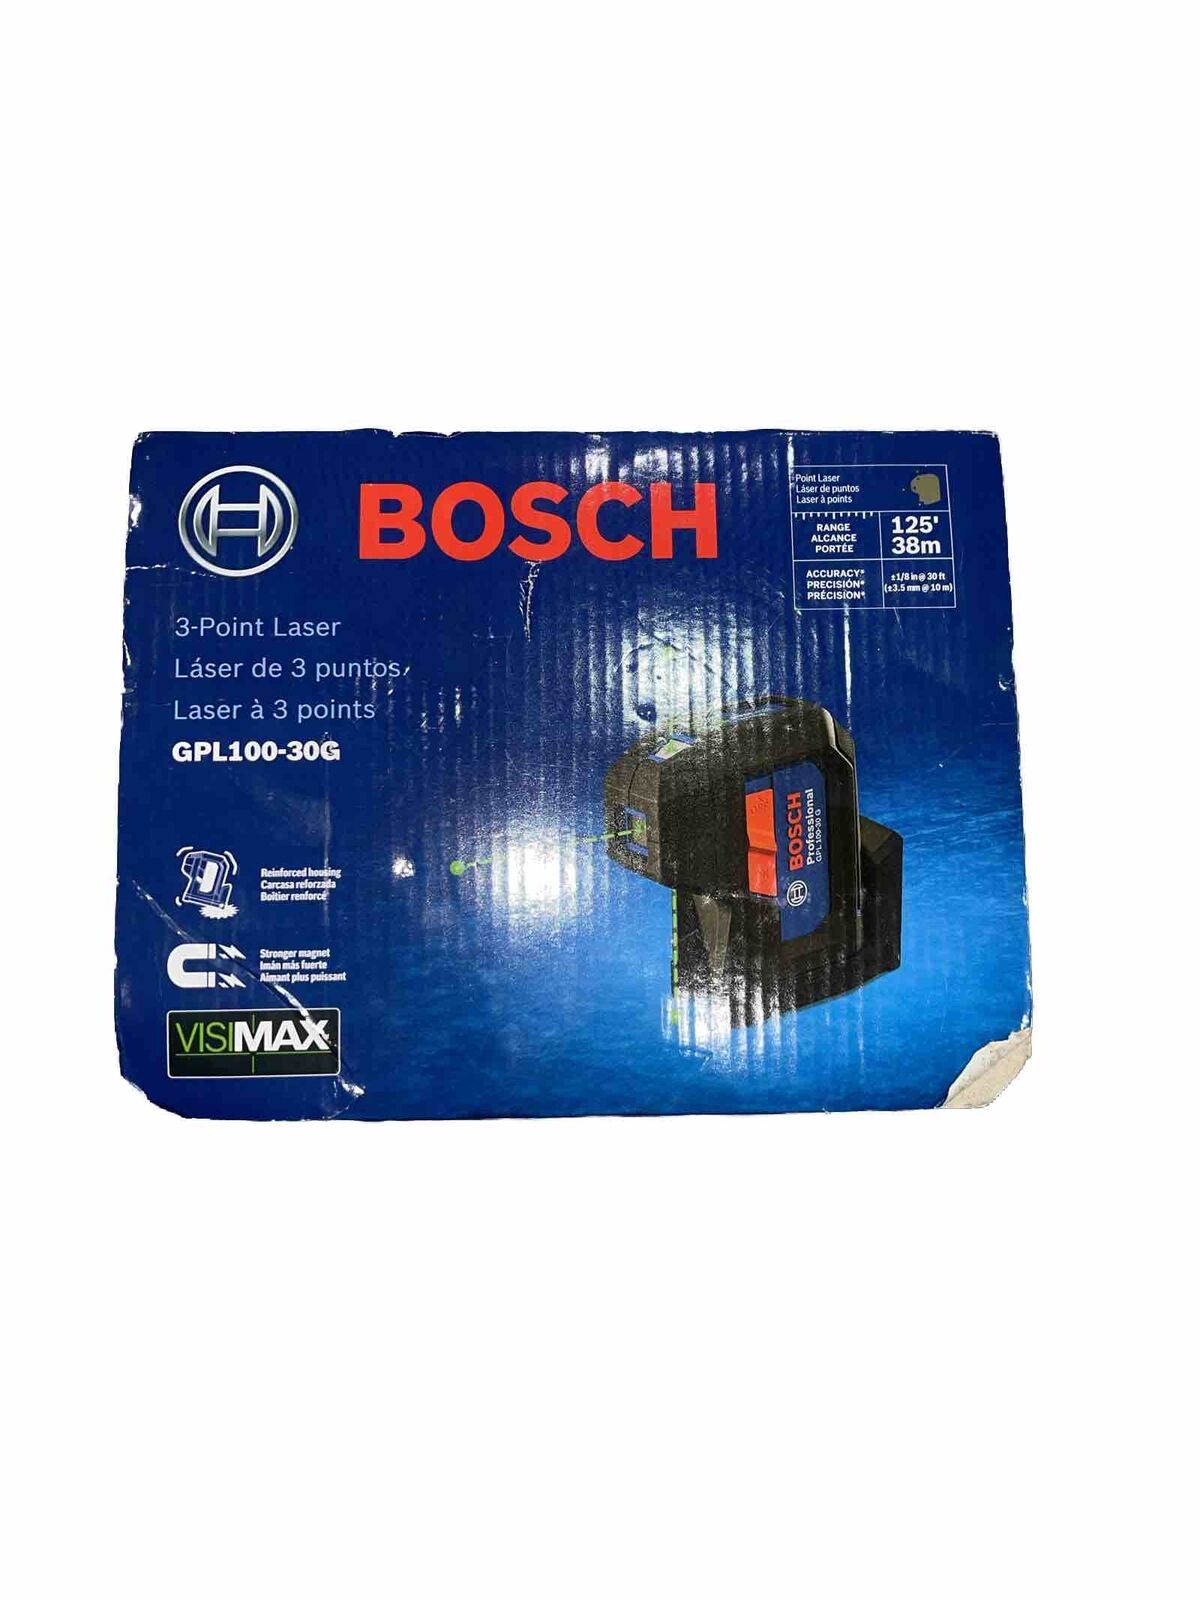 Bosch GPL100-30G Cordless Self Leveling Laser 3 POINT 38M FRE FAST SHIPPING NEW